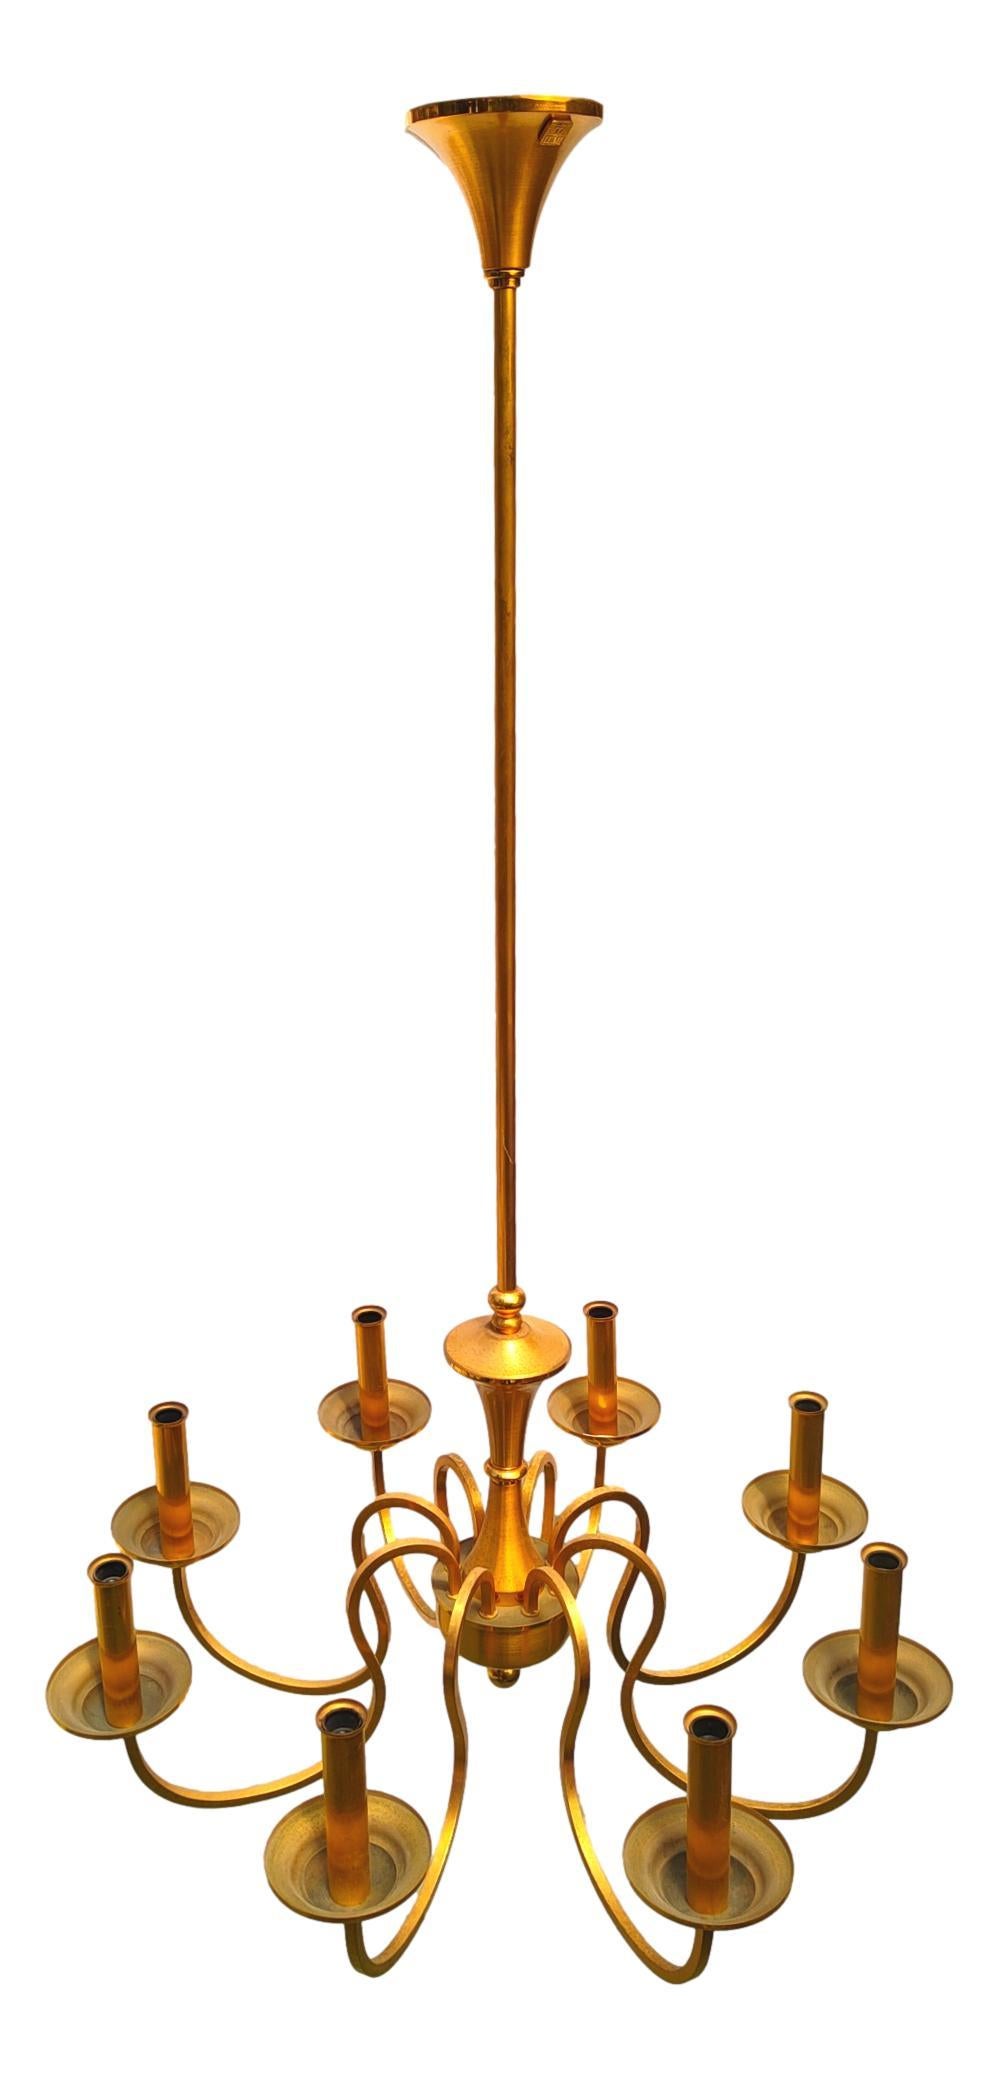 eight light chandelier design oscar torlasco for lumi milano 1950s signed In Good Condition For Sale In taranto, IT